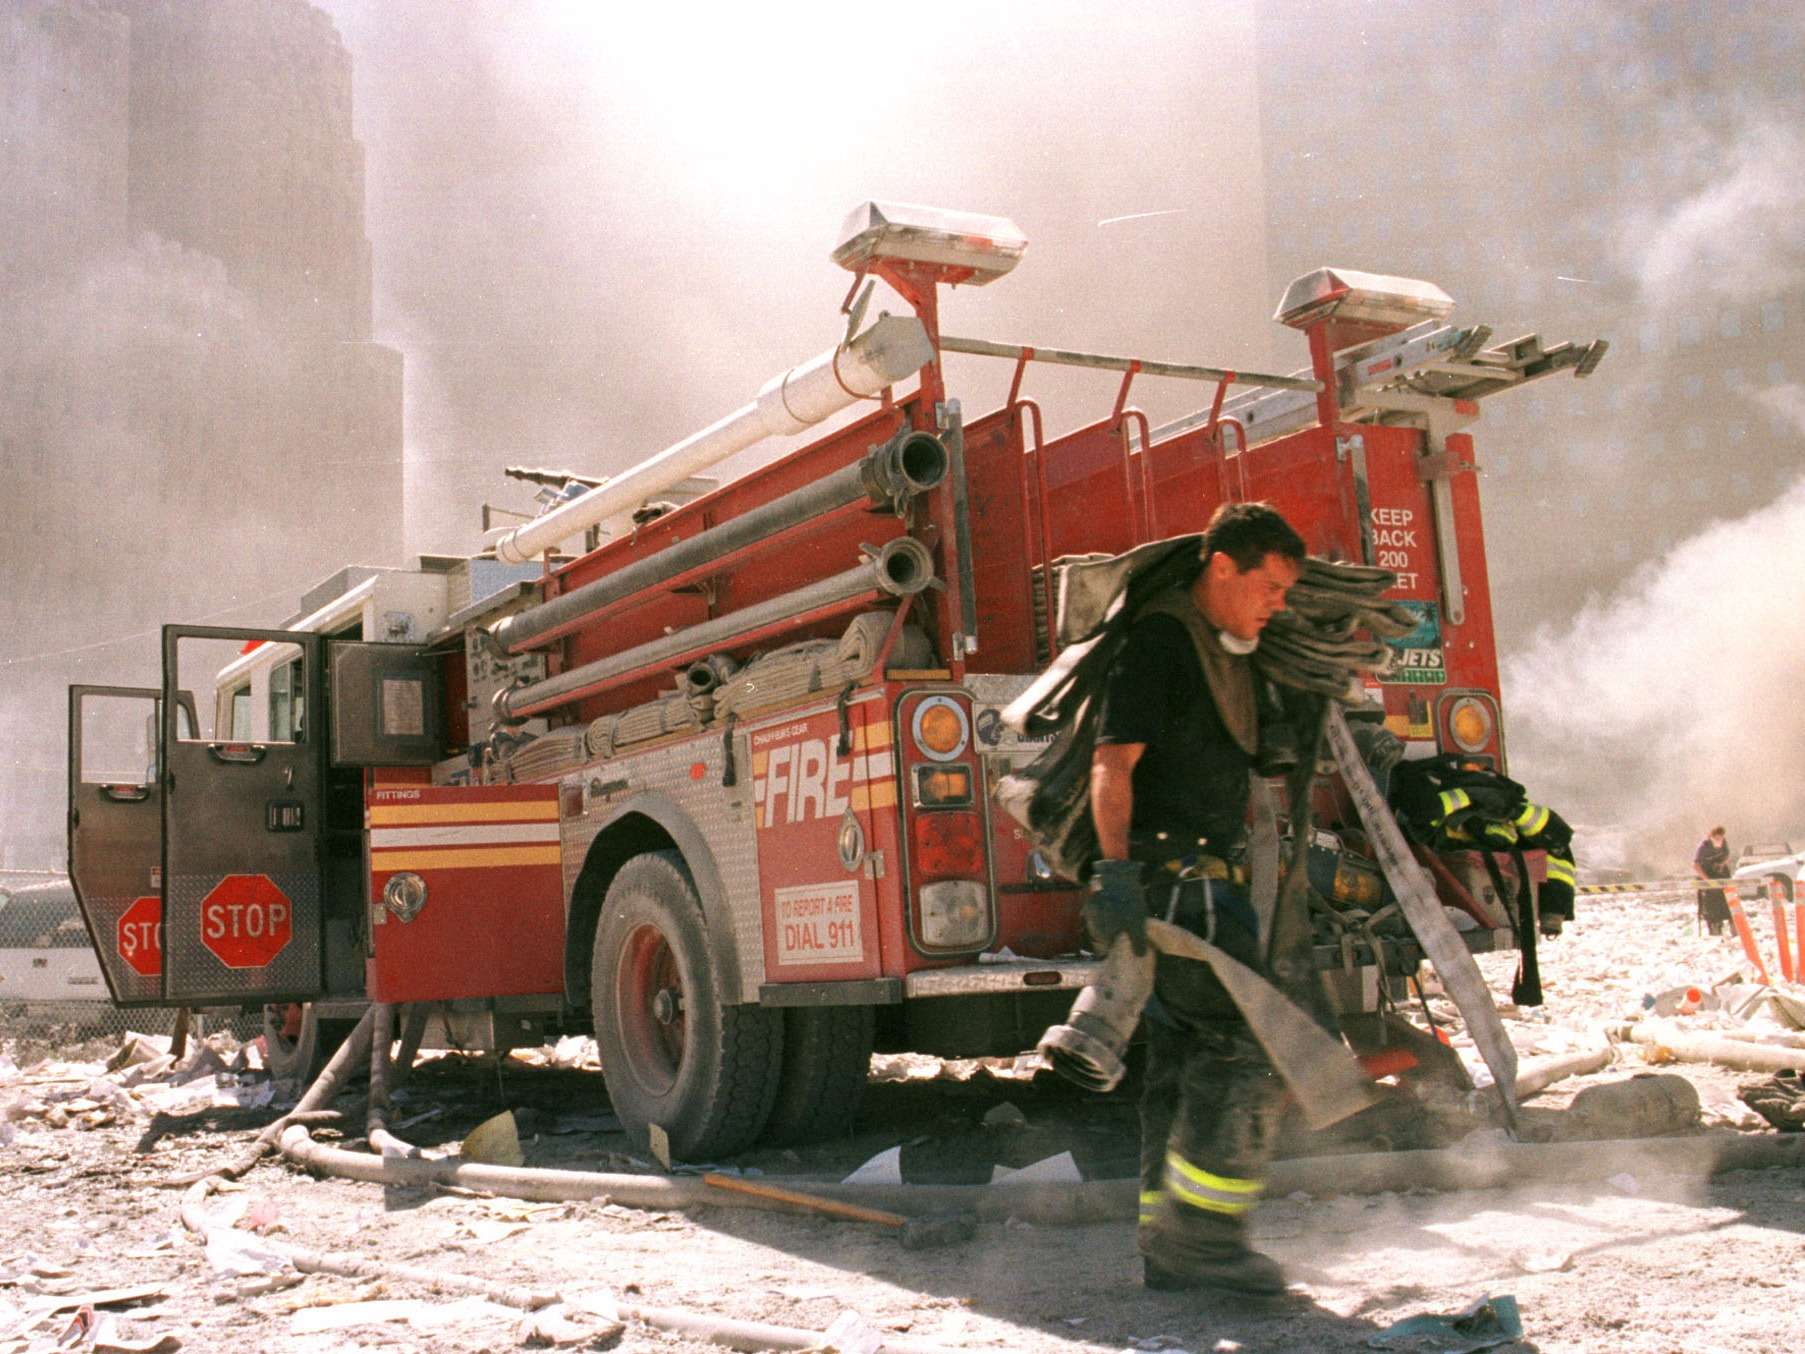 The New York City Fire Department rushed to the scene and suffered incredible losses of life as it tried to save people from the burning towers. 343 members were killed.